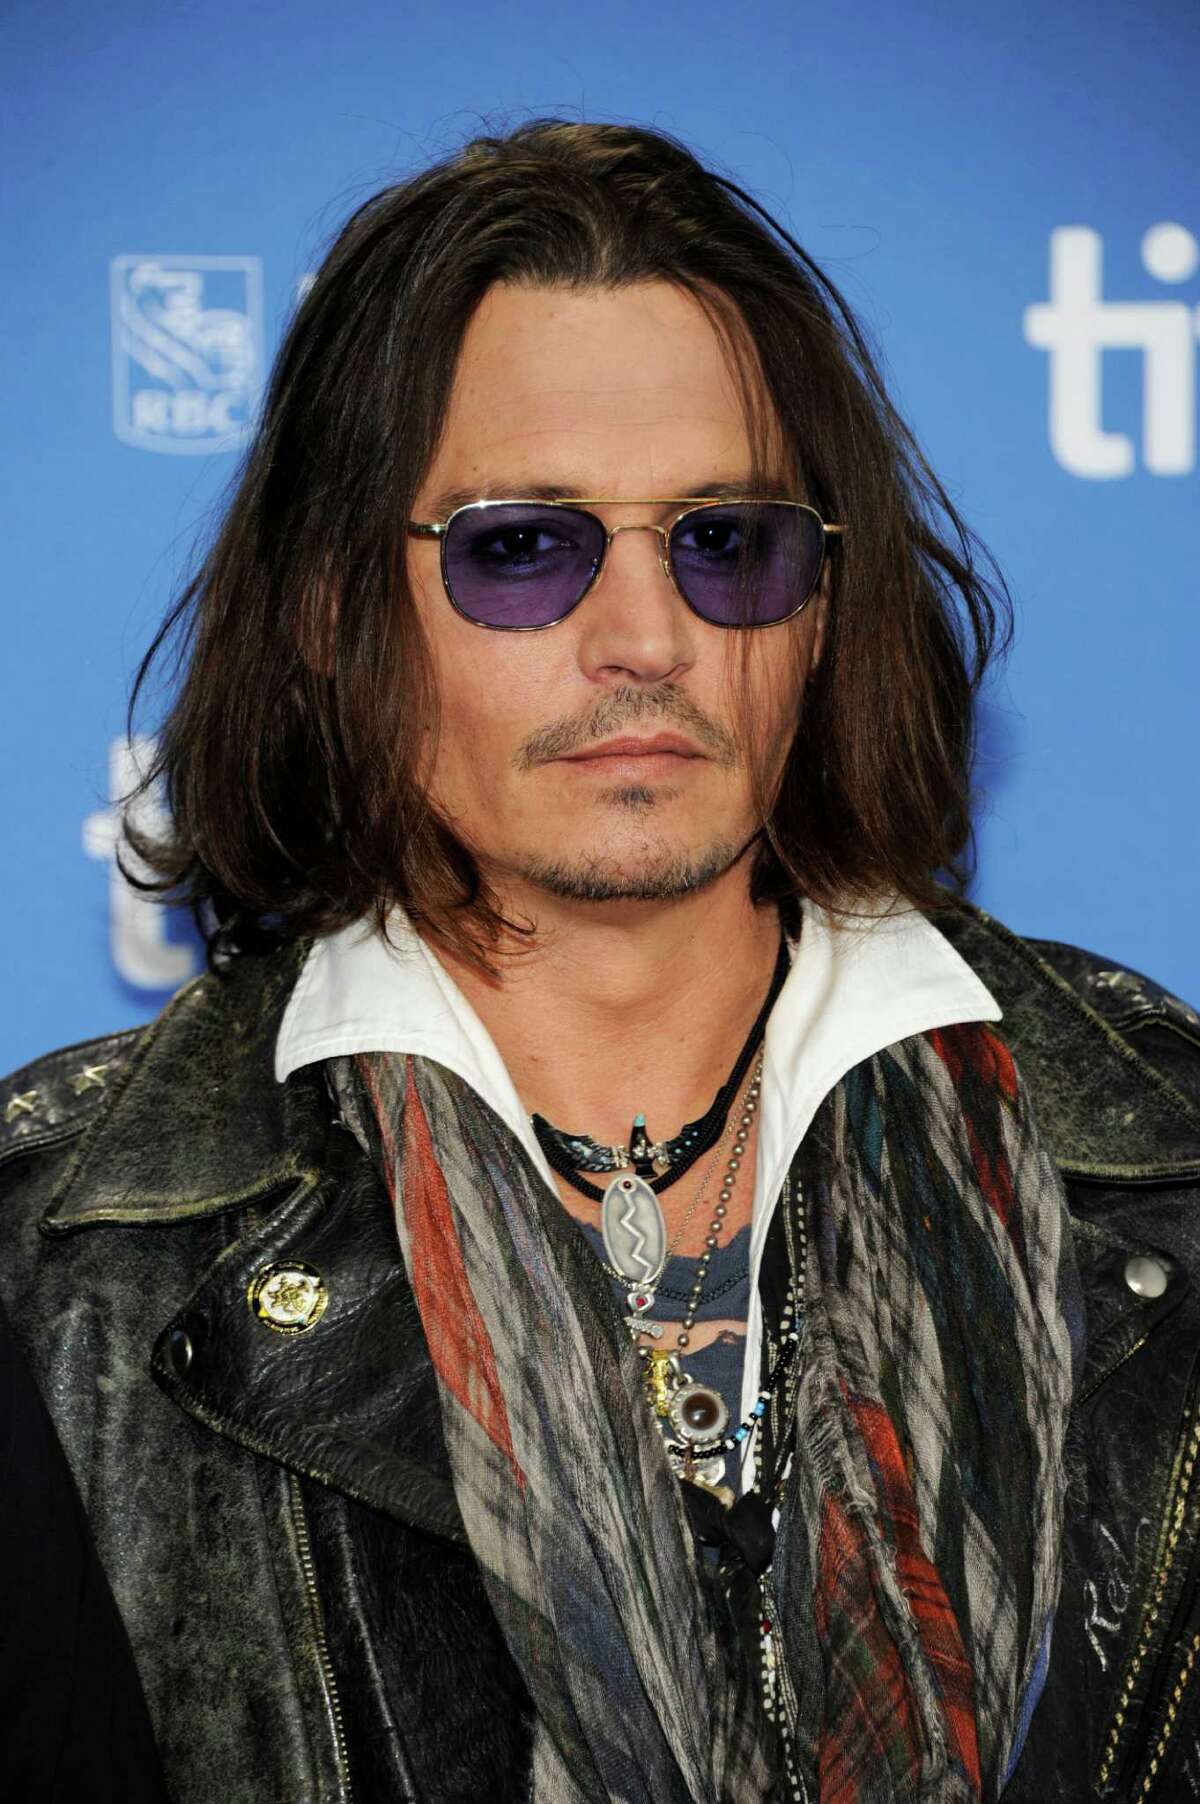 FILE - In this Sept. 8, 2012 file photo, actor Johnny Depp participates in a photo call and press conference for the film "West of Memphis" at TIFF Bell Lightbox during the Toronto International Film Festival, in Toronto. HarperCollins Publishers announced Monday, Oct. 15, 2012, that Depp will help run an imprint that will be a home for AA?“authentic, outspoken and visionaryAA?” books. (Photo by Evan Agostini/Invision/AP, File)